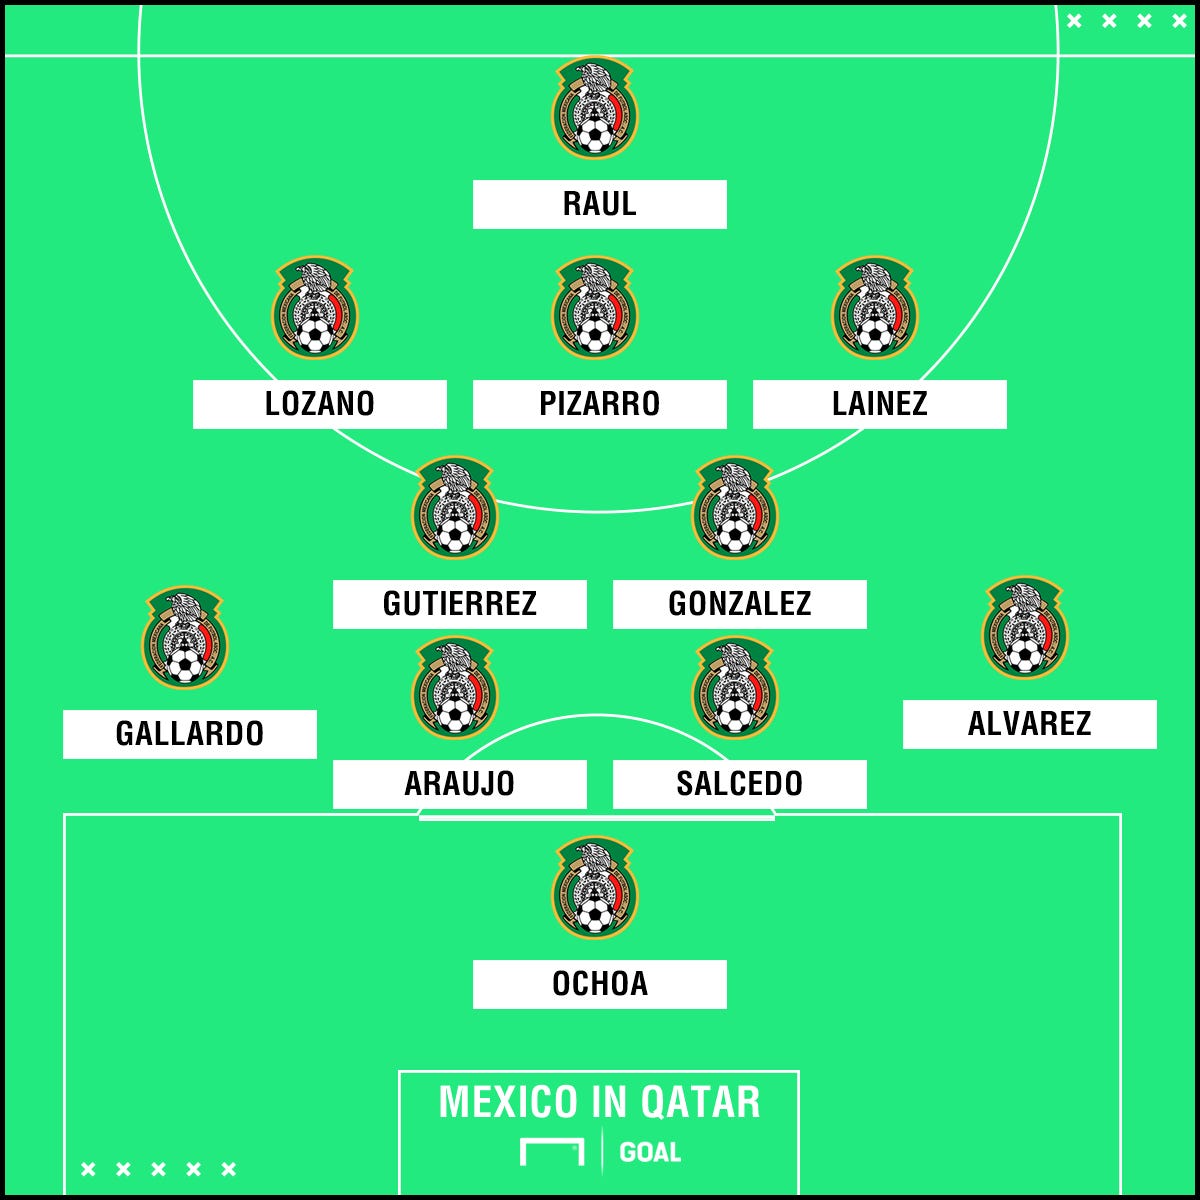 Chicharito & Moreno out, Lainez in How Mexico must rebuild after